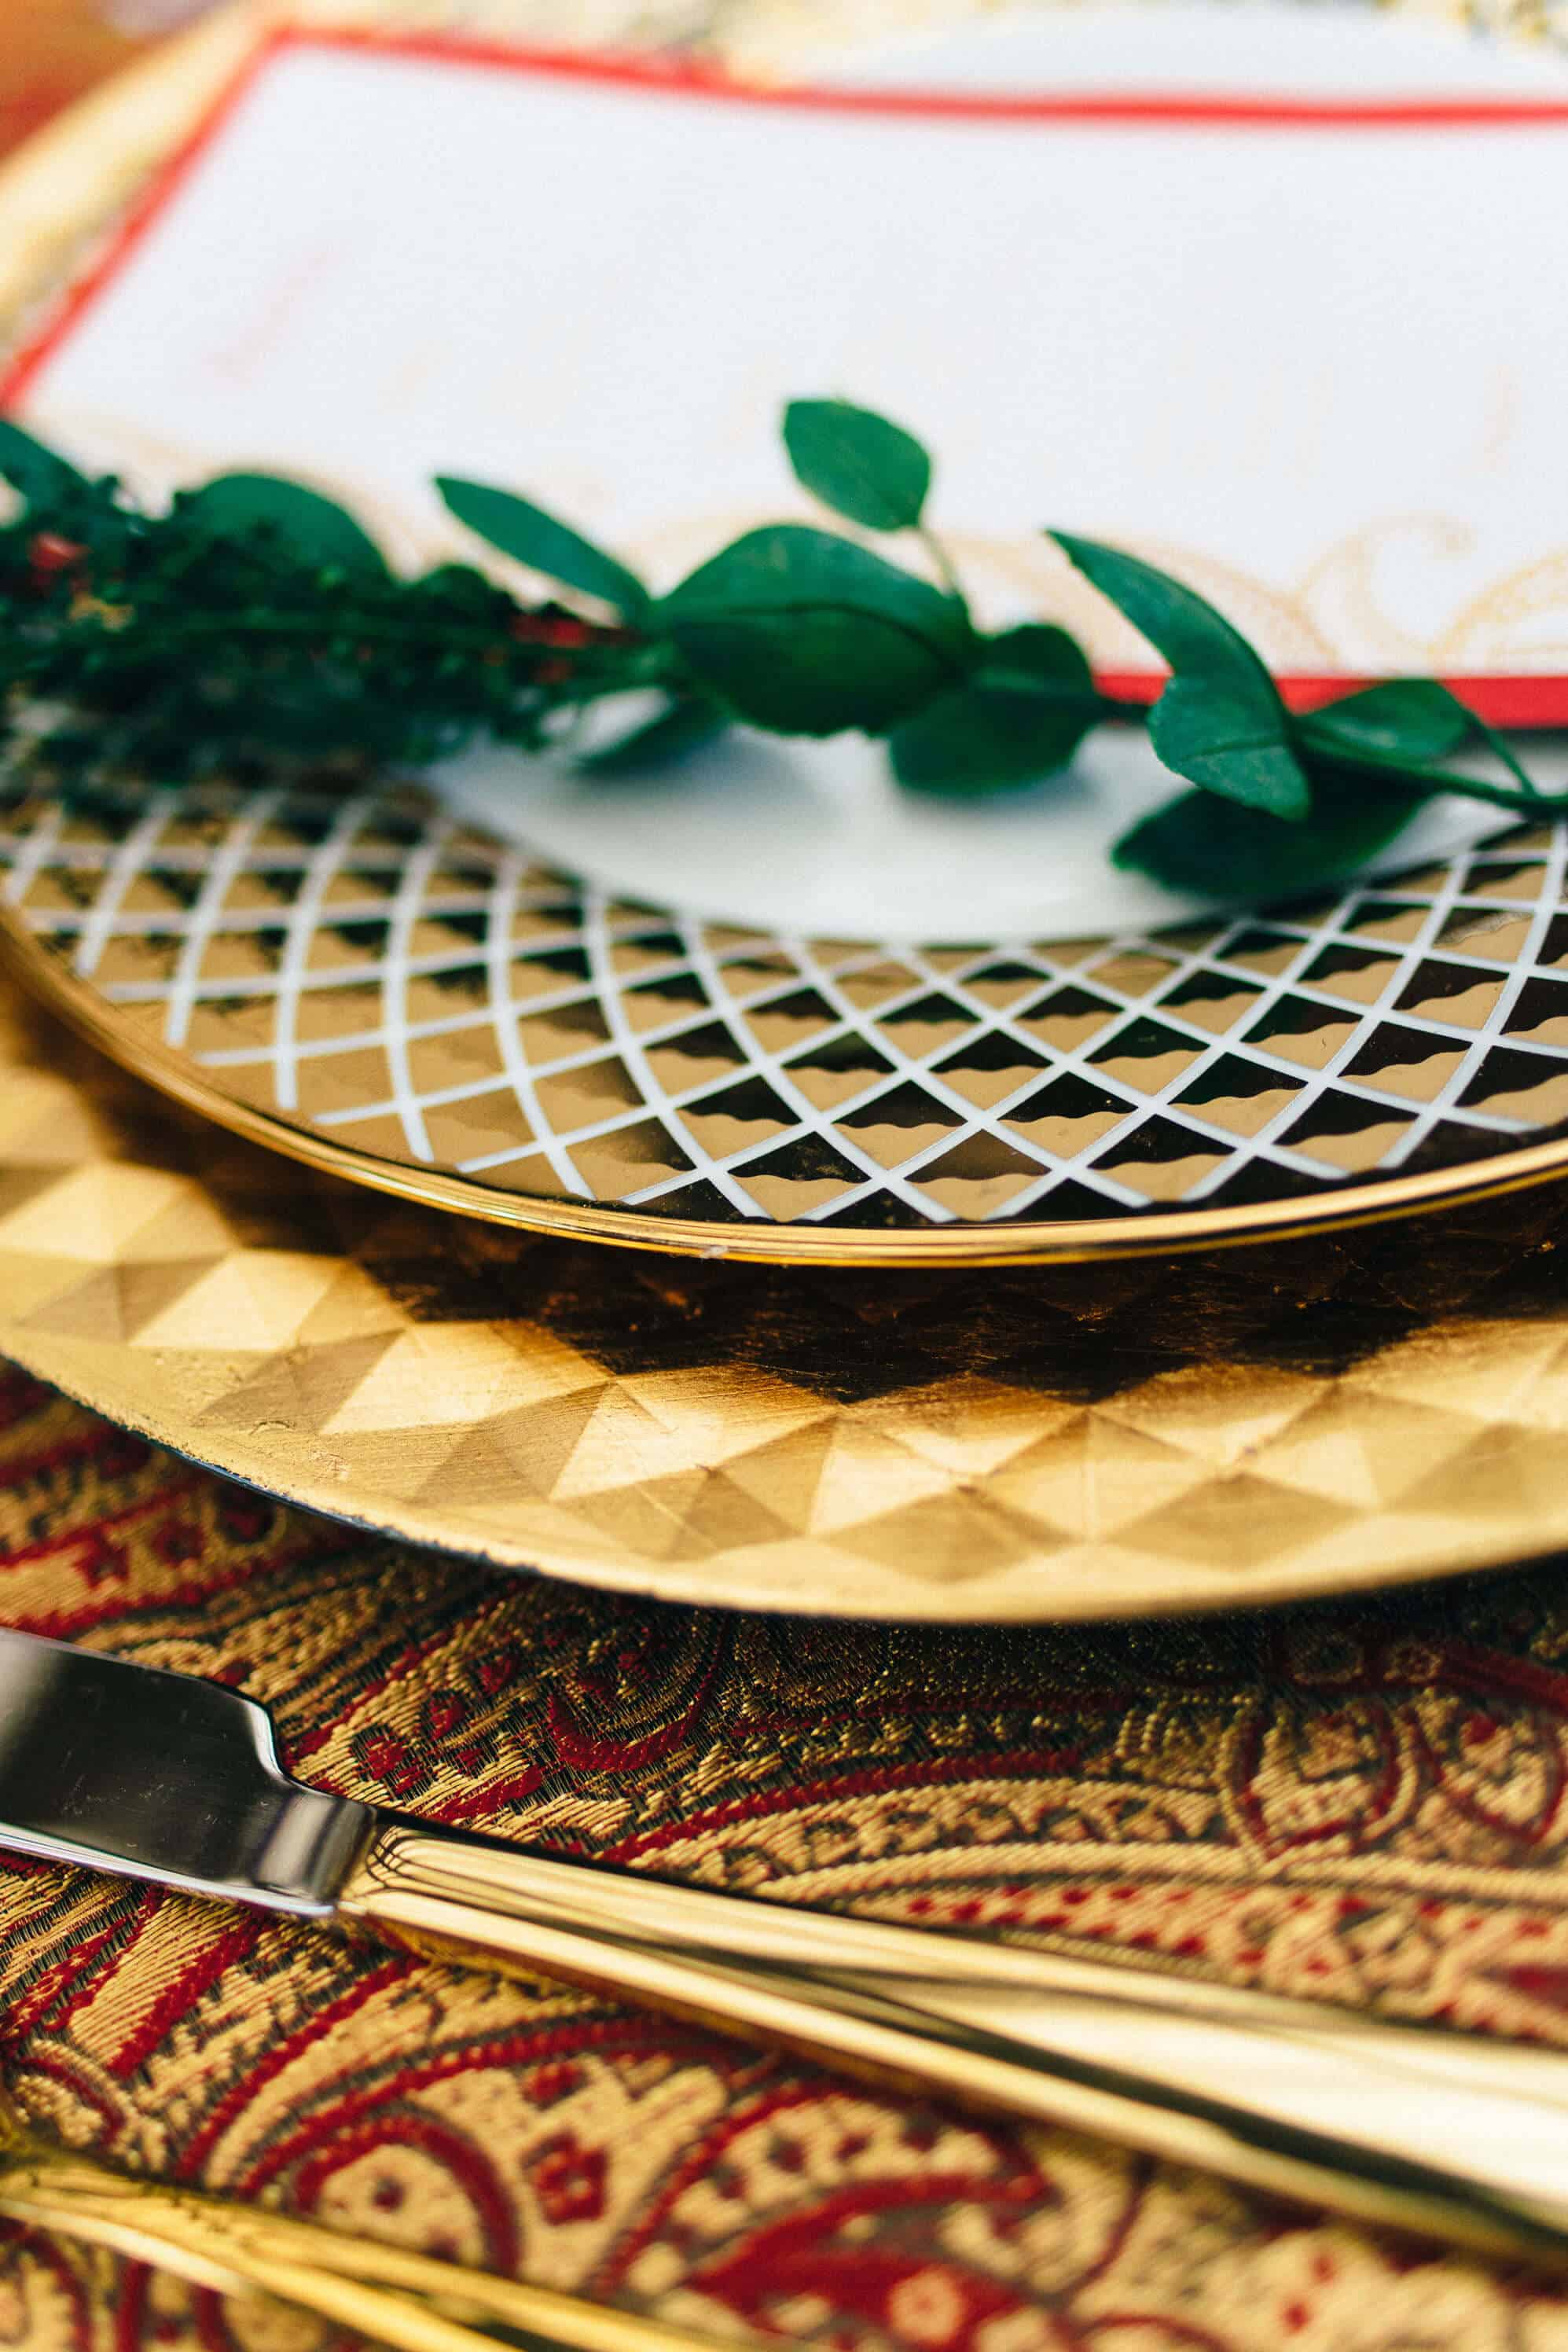 A close up of plates and forks on a table